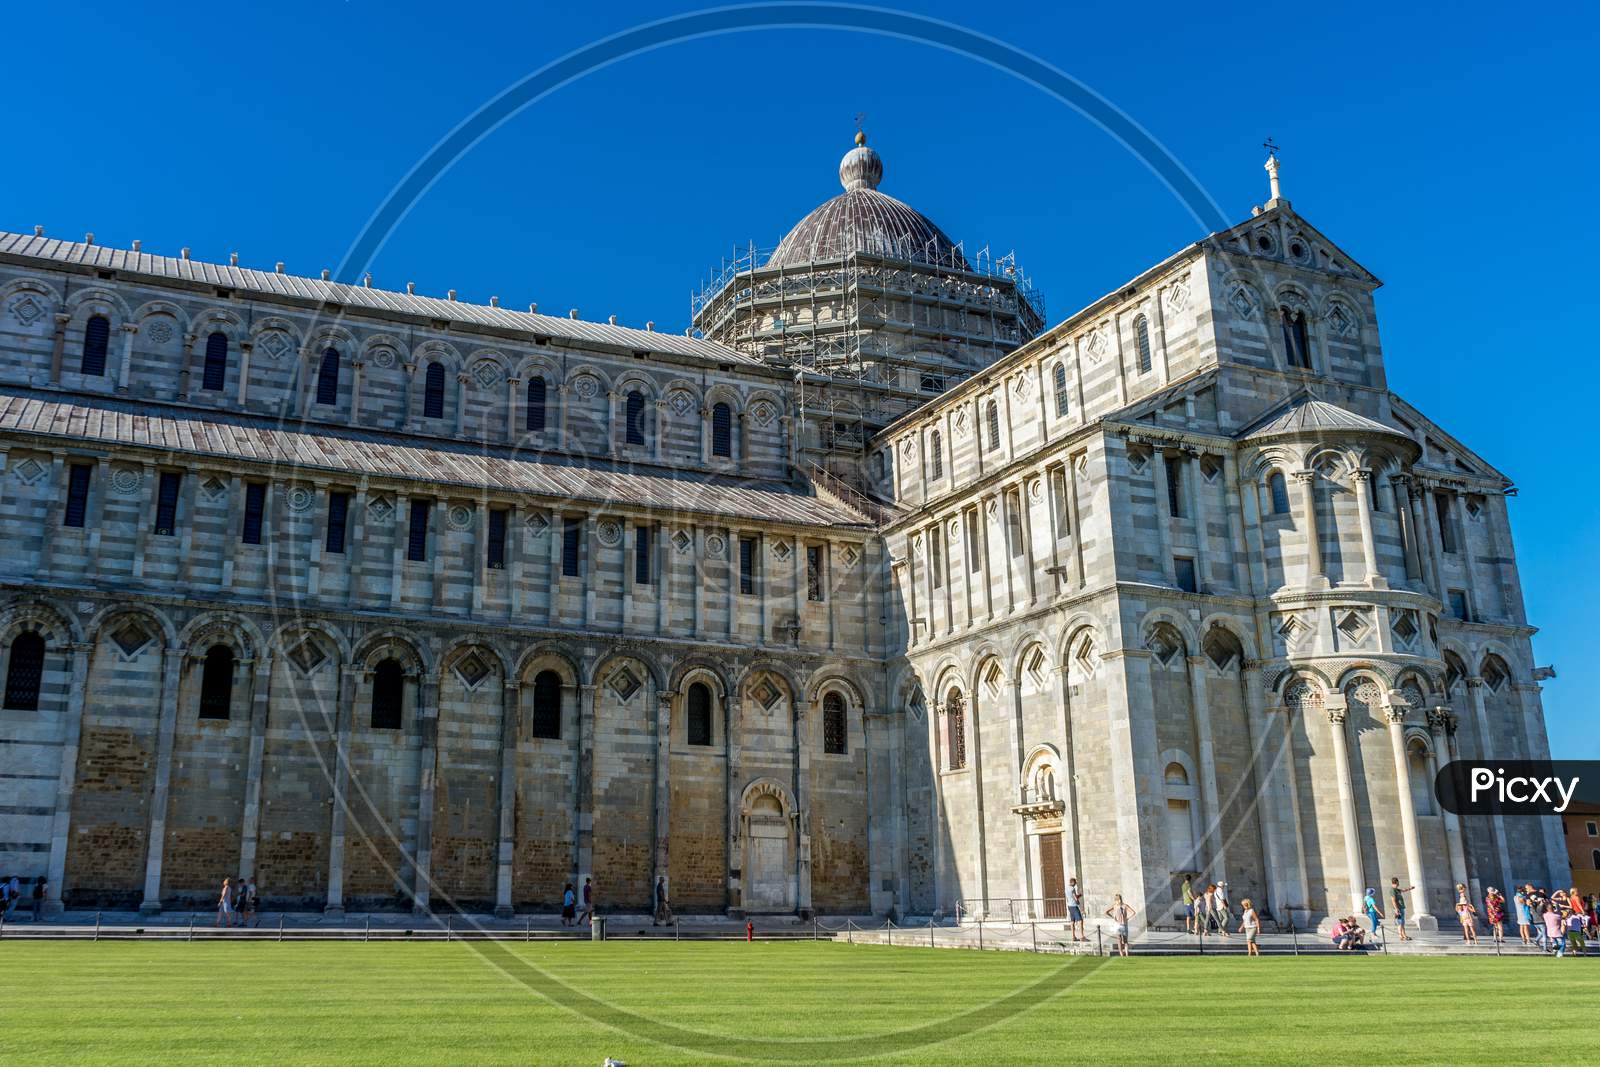 Pisa, Italy - 25 June 2018: The Leaning Tower Of Pisa At Piazza Del Miracoli Duomo Square,Camposanto Cemetery In Tuscany, Italy